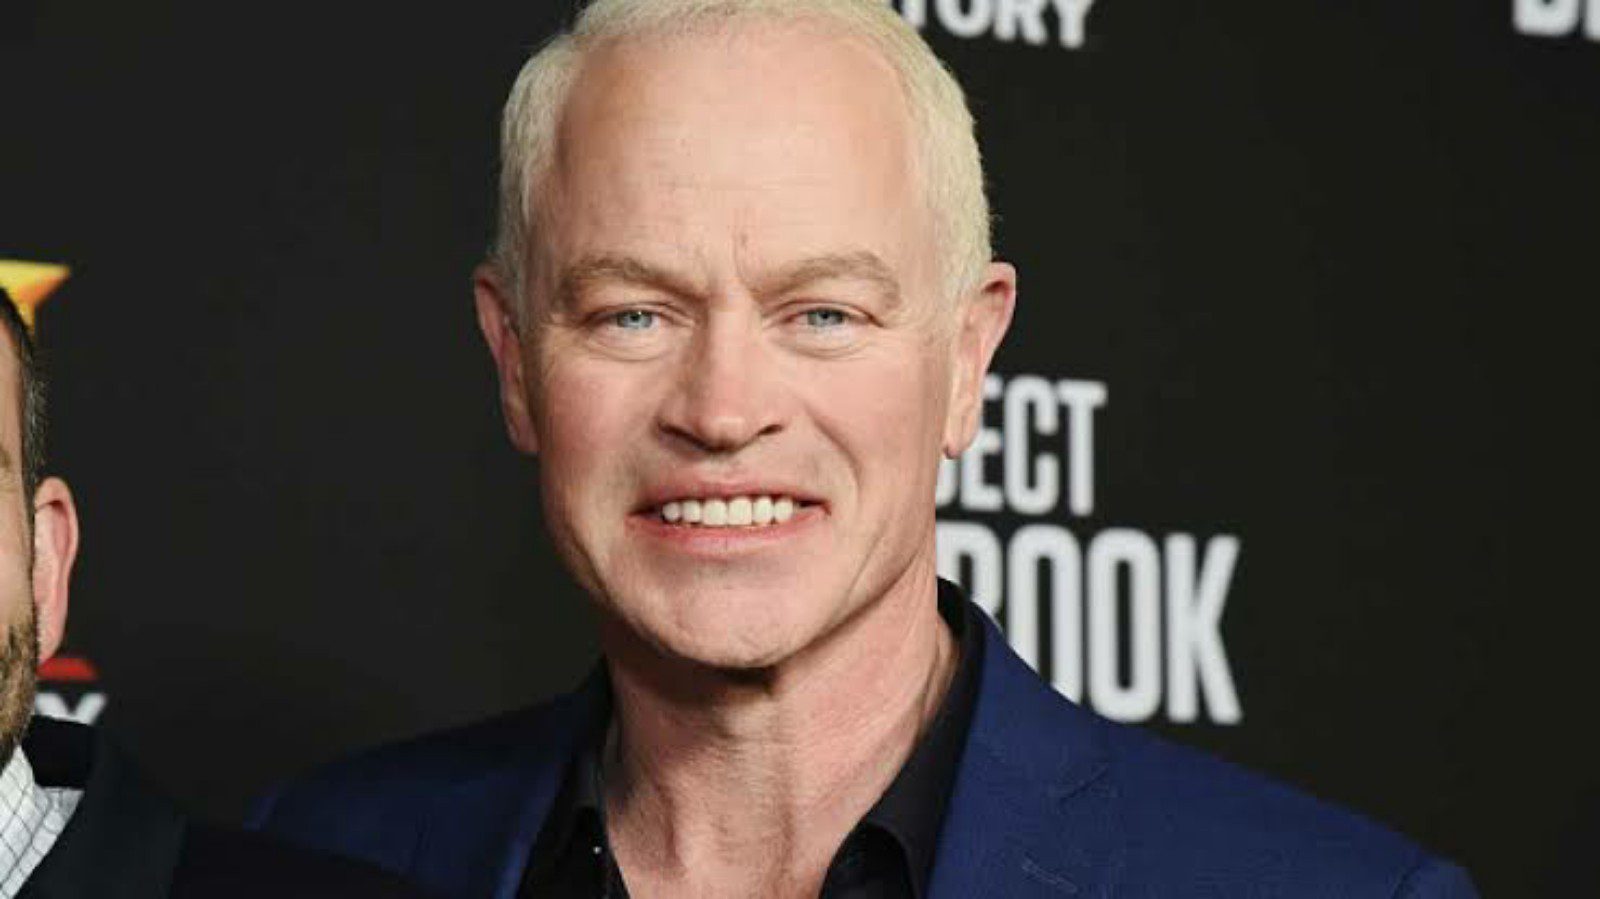 Neal Mcdonough Net Worth All About Celebrity's Lifestyle & Sources of